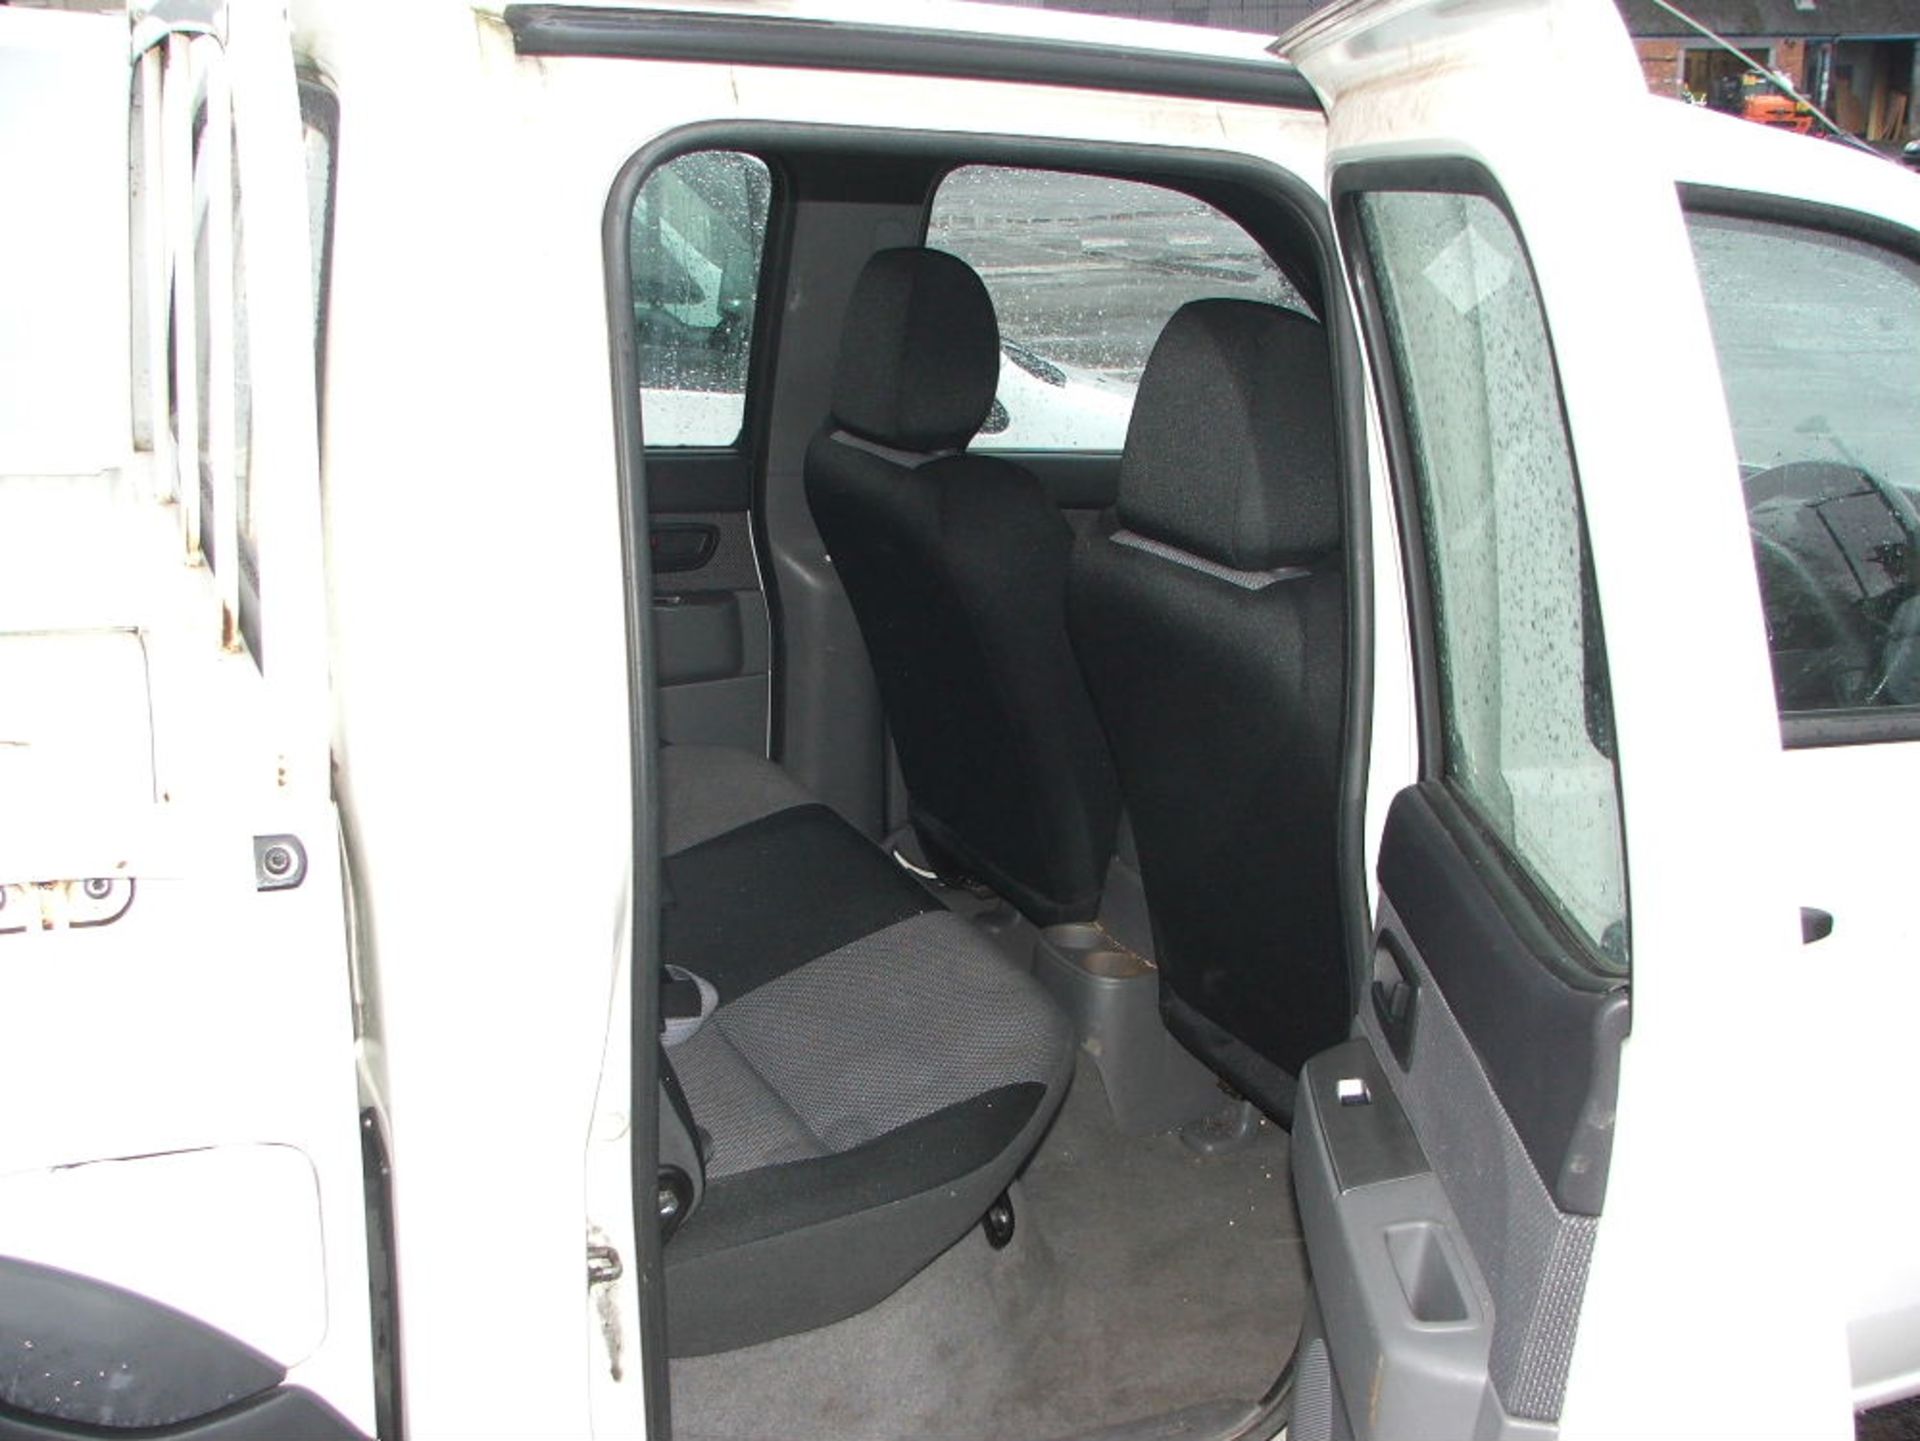 WHITE FORD RANGER TDCI OPEN BACK 4 X 4 TWIN CAB PICK UP TRUCK WITH TOW BALL & ROOF LIGHT 09 PLATE - Image 4 of 4